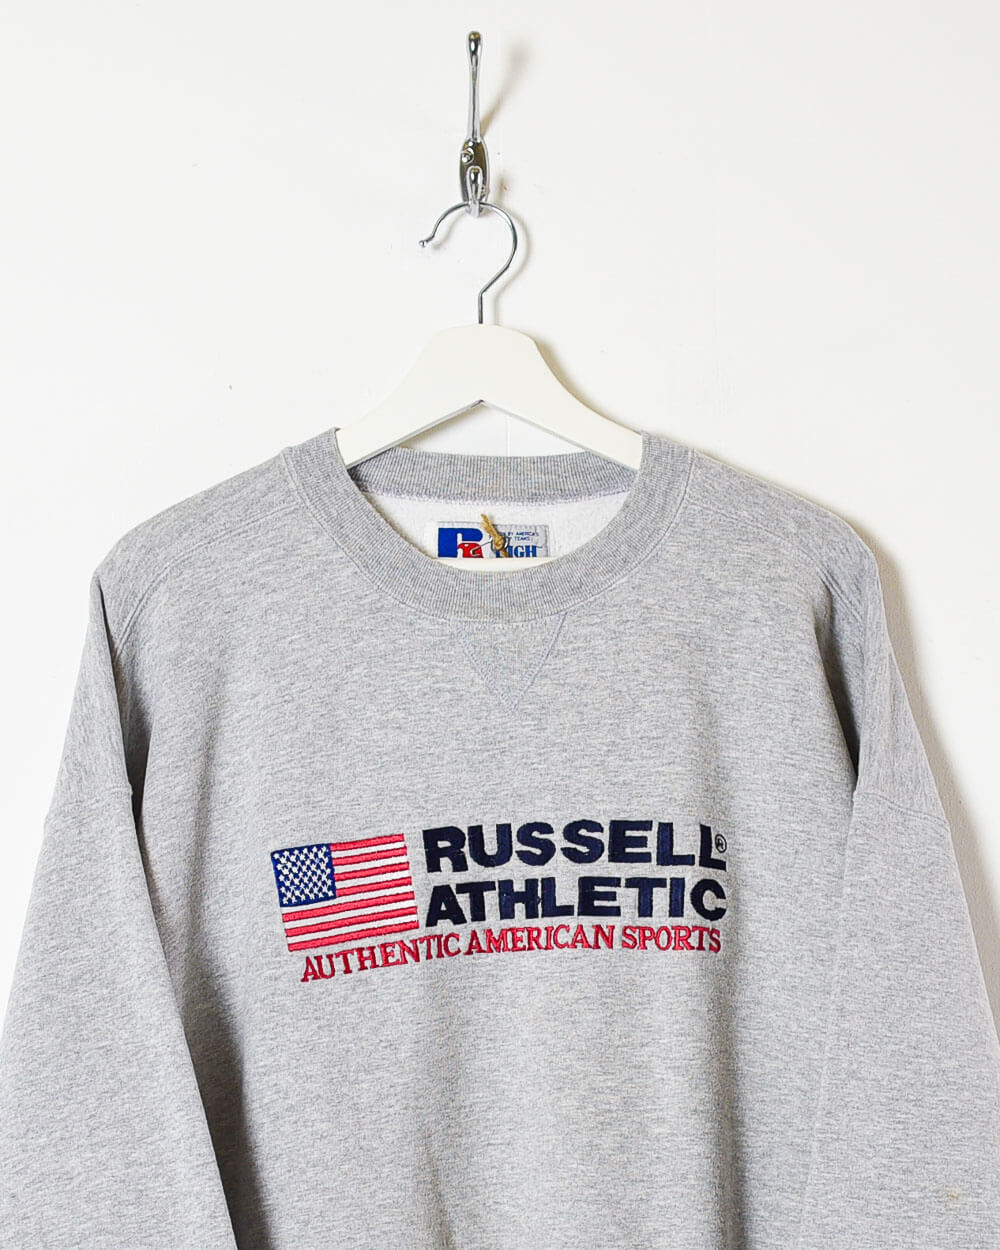 Stone Russell Athletic Authentic American Sport Sweatshirt - X-Large